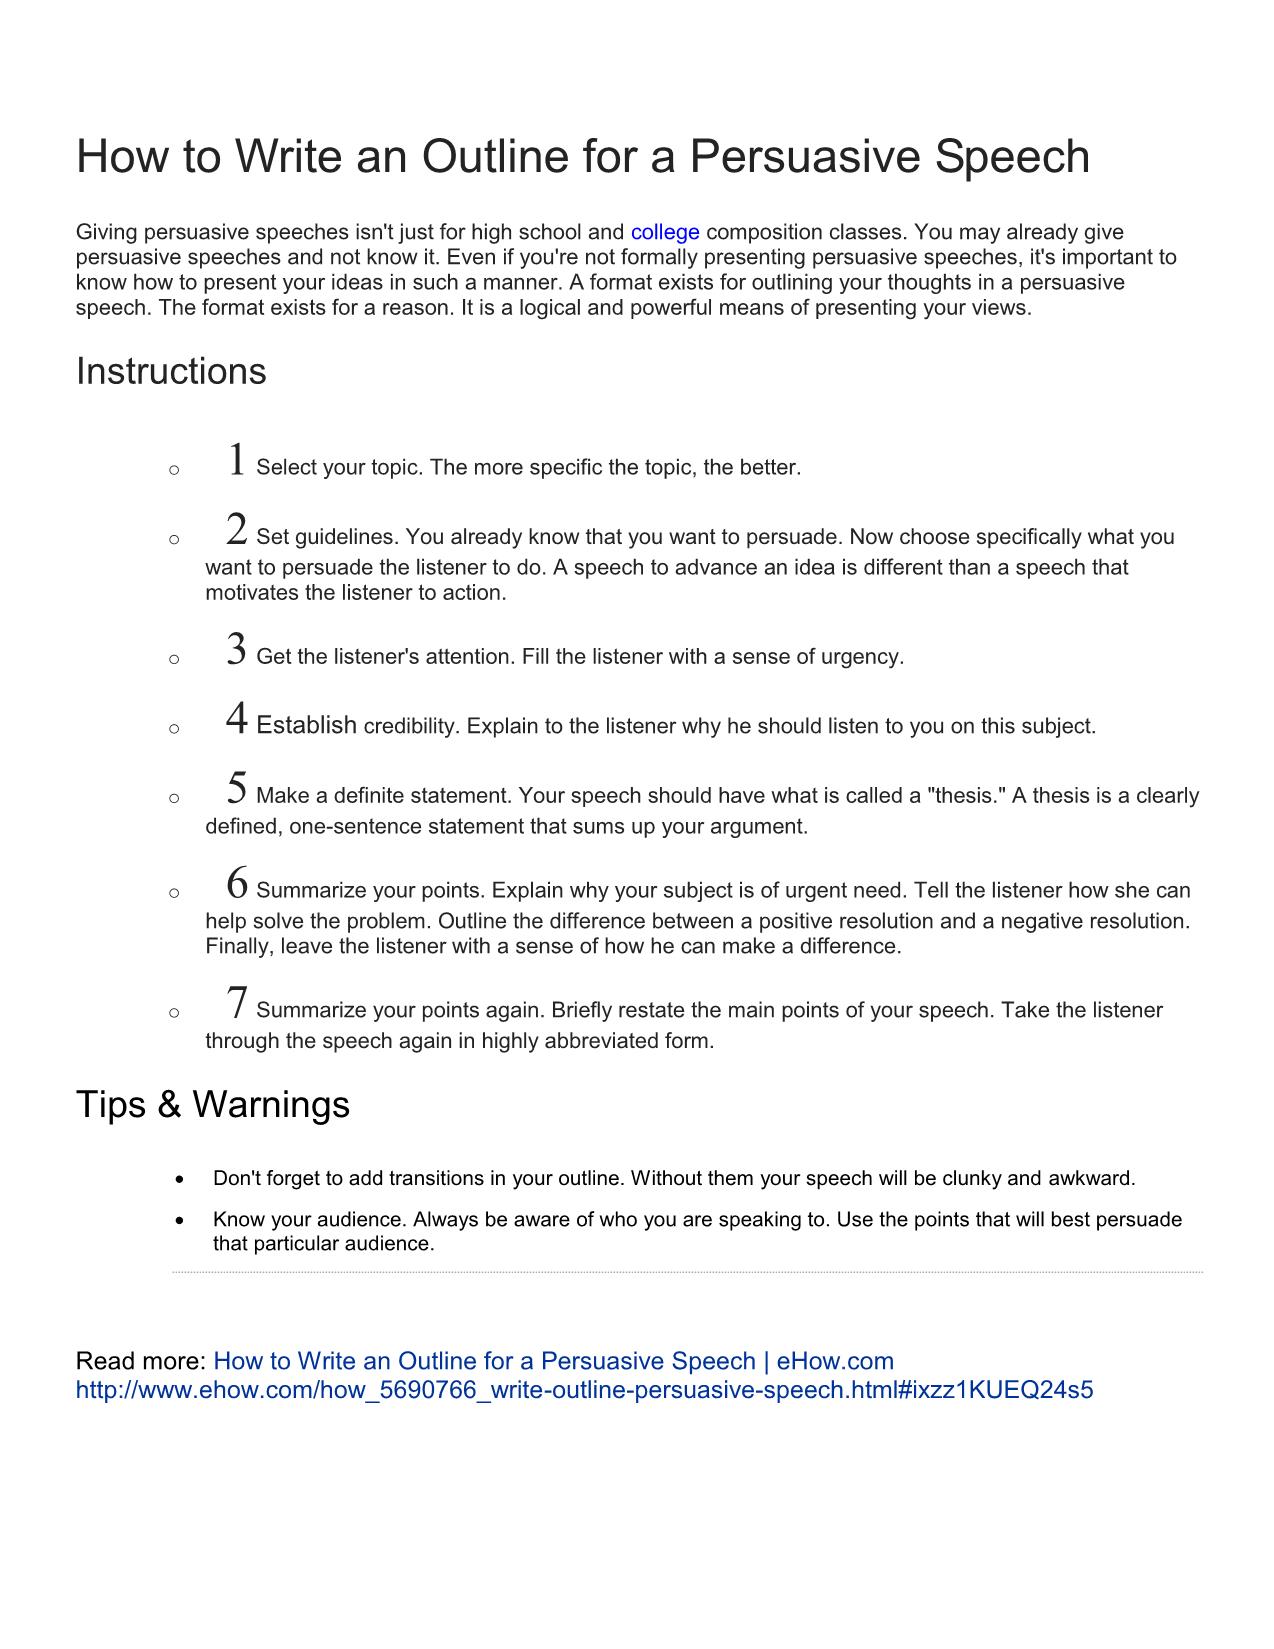 How to write an outline for a persuasive speech trang 1